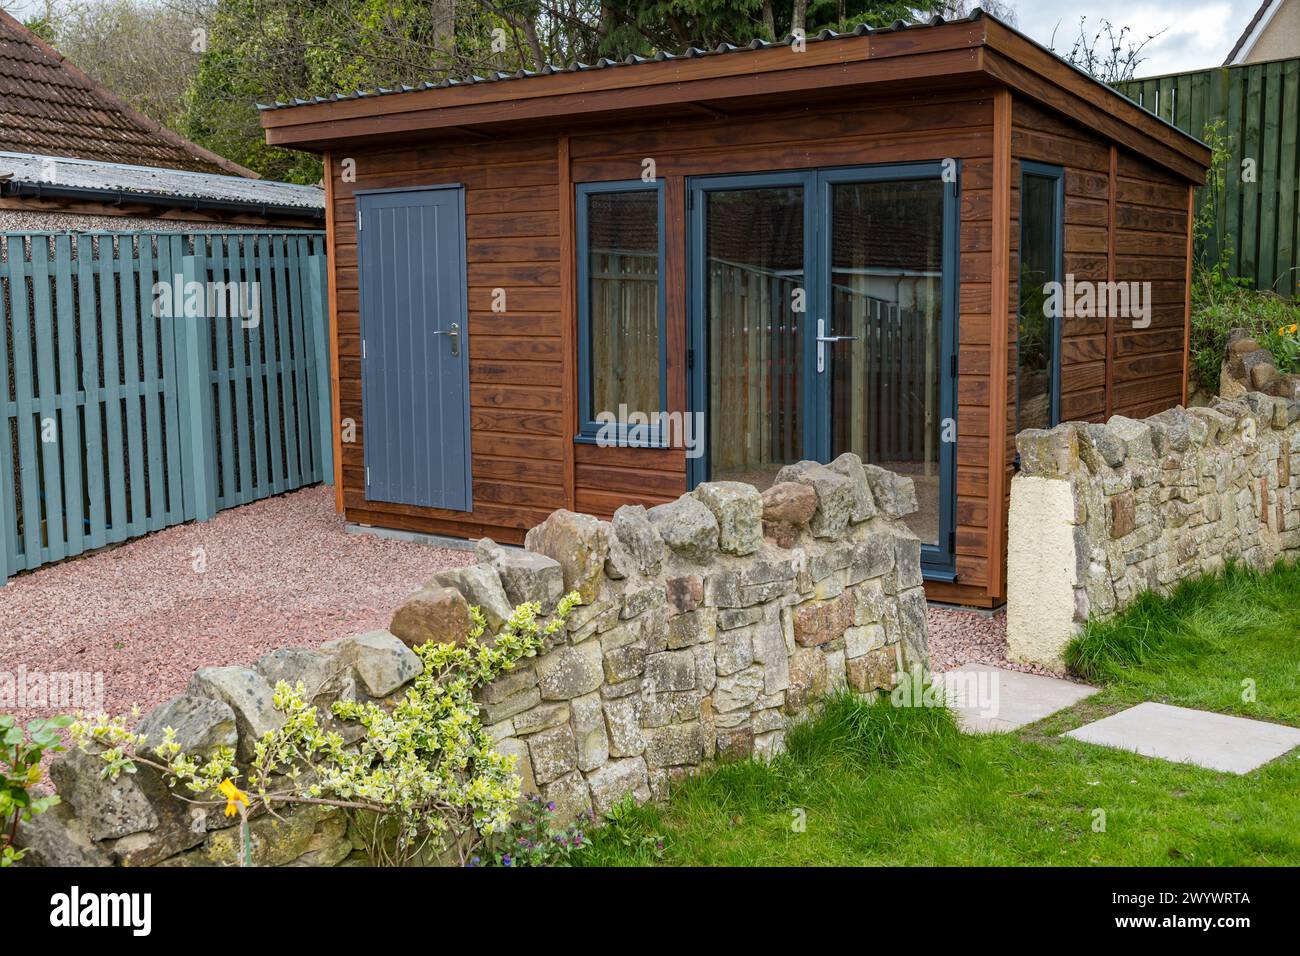 A shed and garden room or summerhouse newly built in a driveway, Scotland, UK Stock Photo